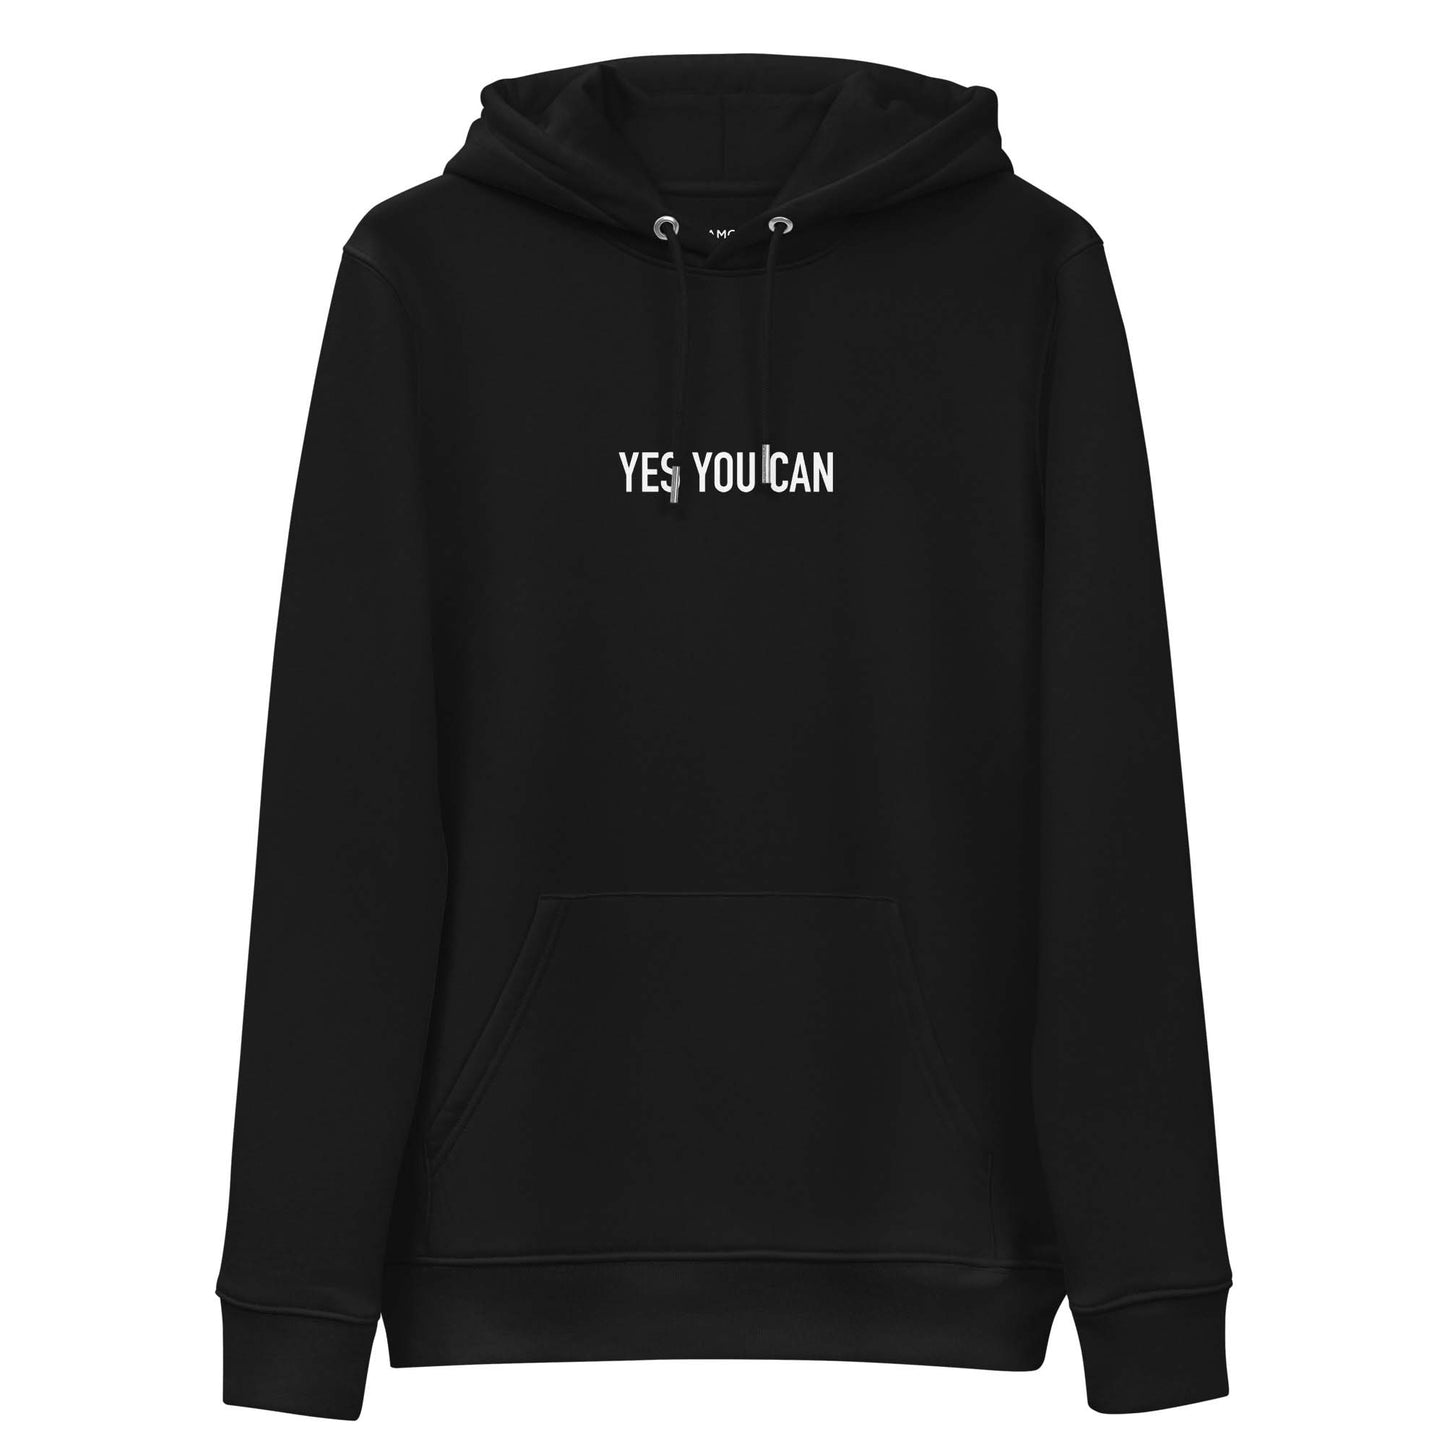 Women black sustainable hoodie with inspirational quote, "Yes You Can."